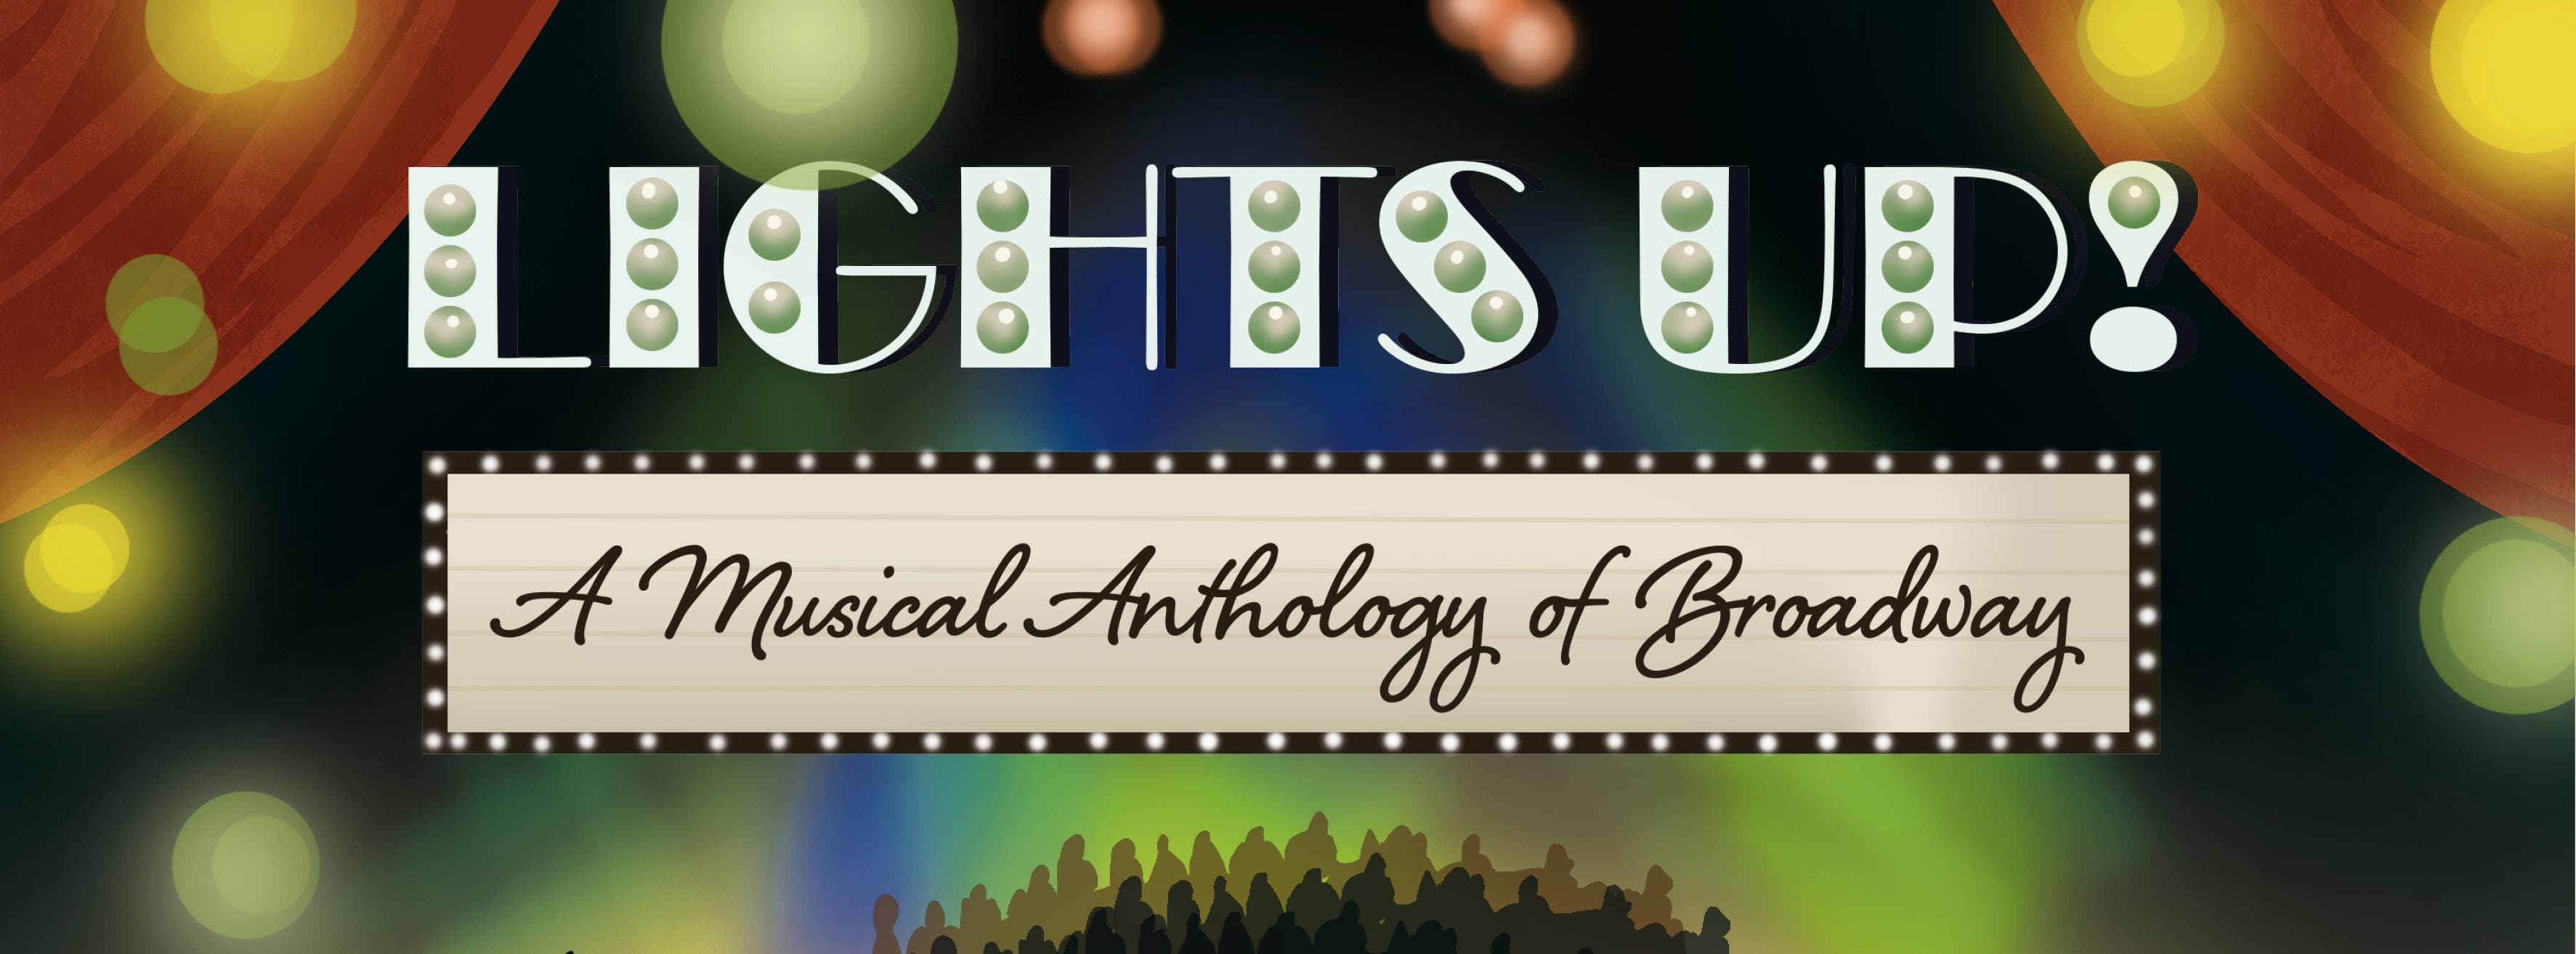 Lights Up! A Musical Anthology of Broadway